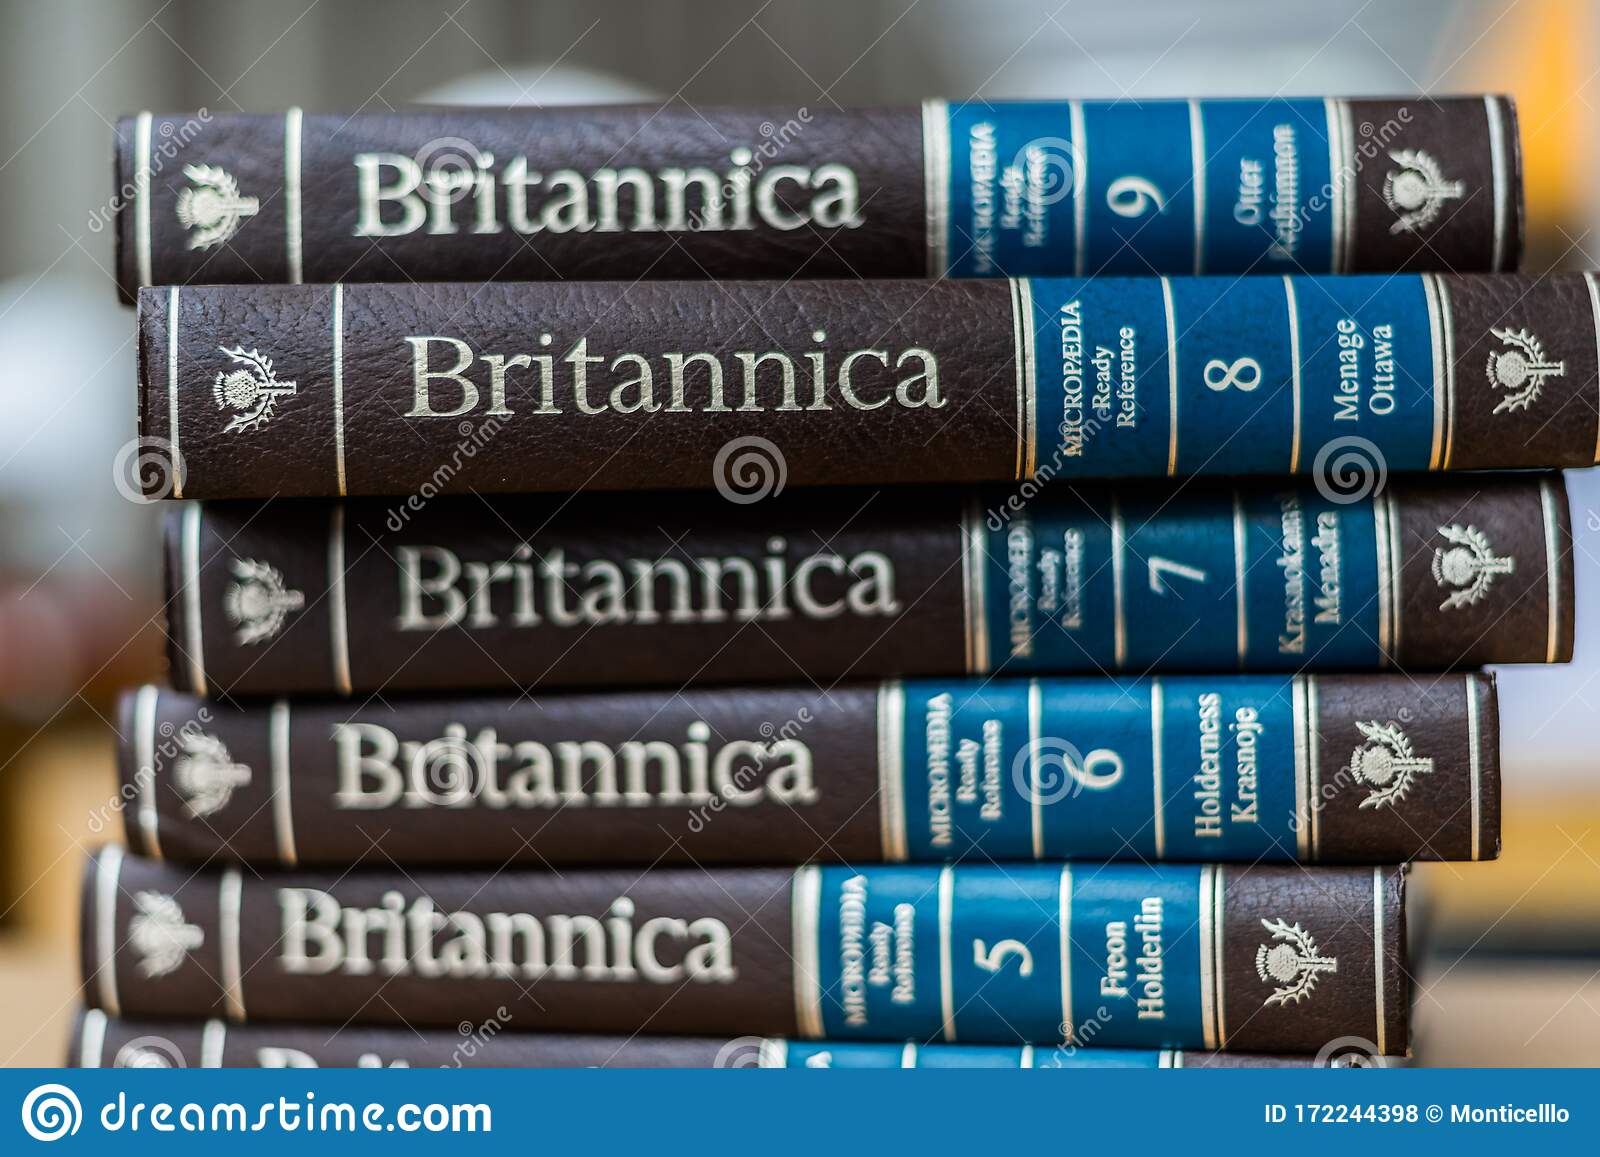 how did publishers and editors write the 15th edition of the encyclopaedia britannica